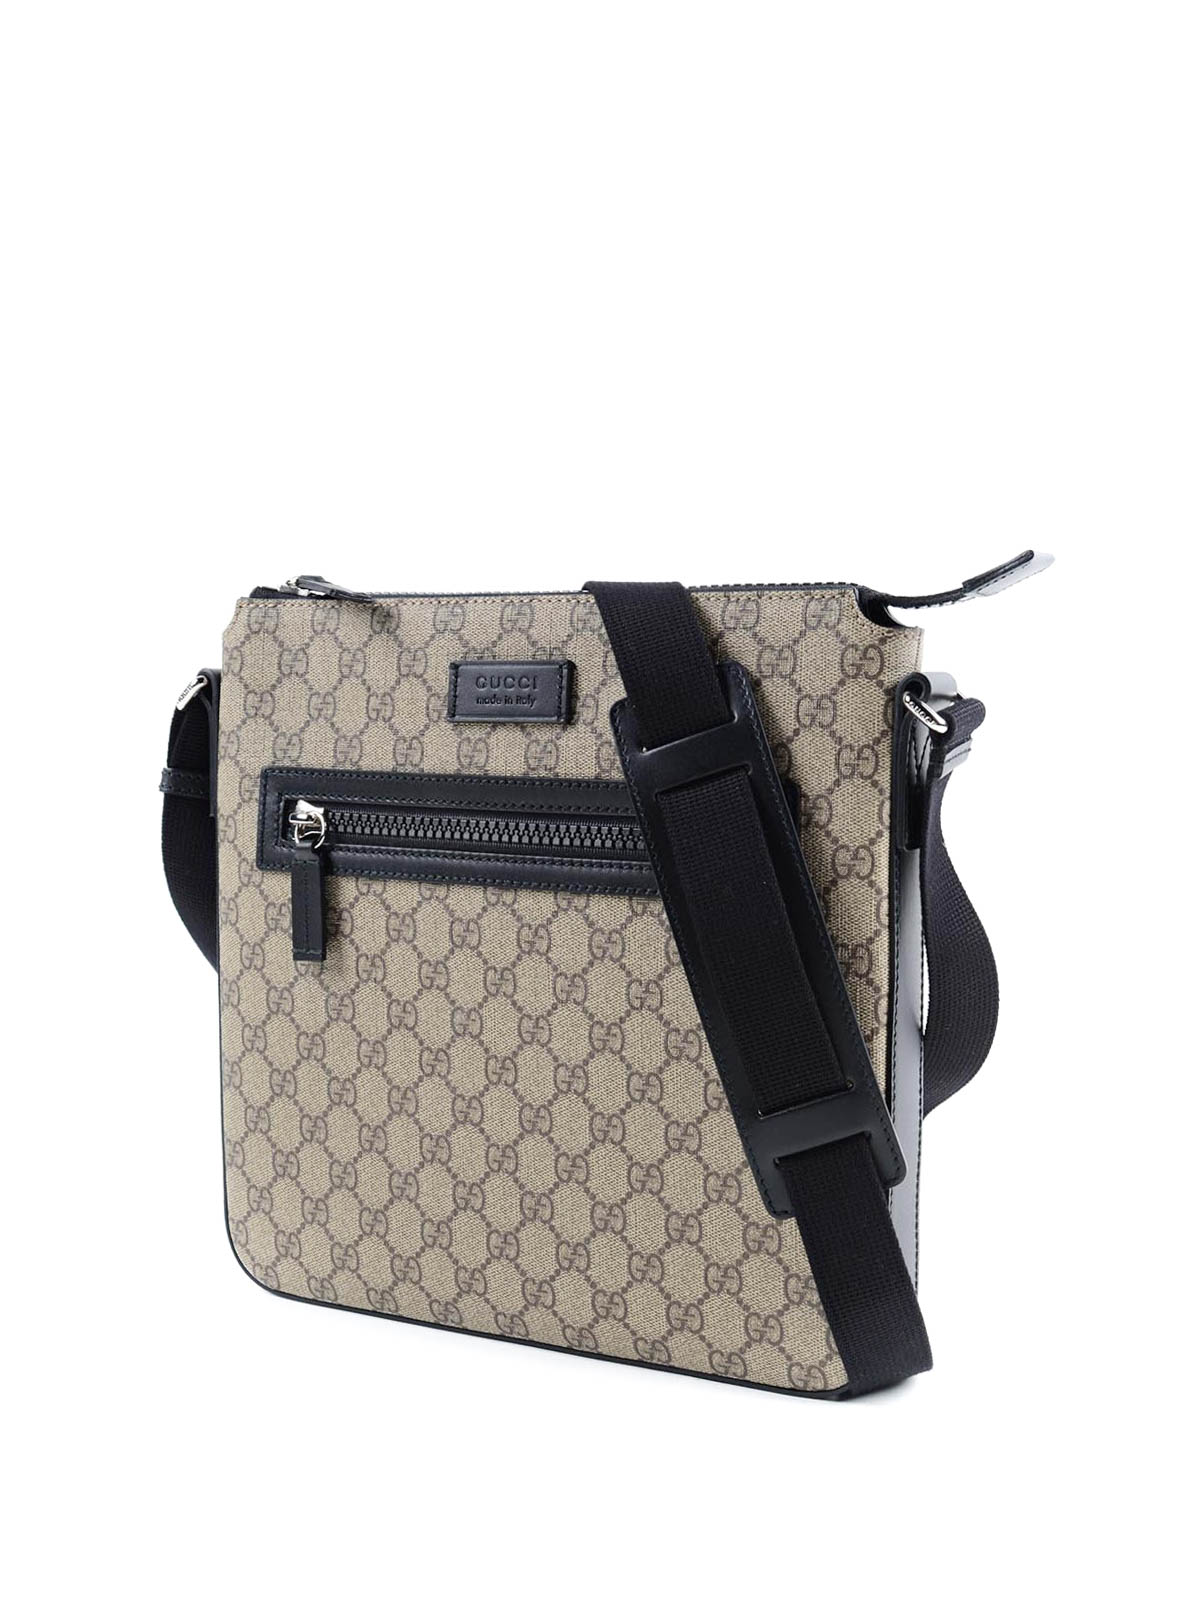 GG Supreme crossbody by Gucci - cross body bags | Shop online at www.bagssaleusa.com